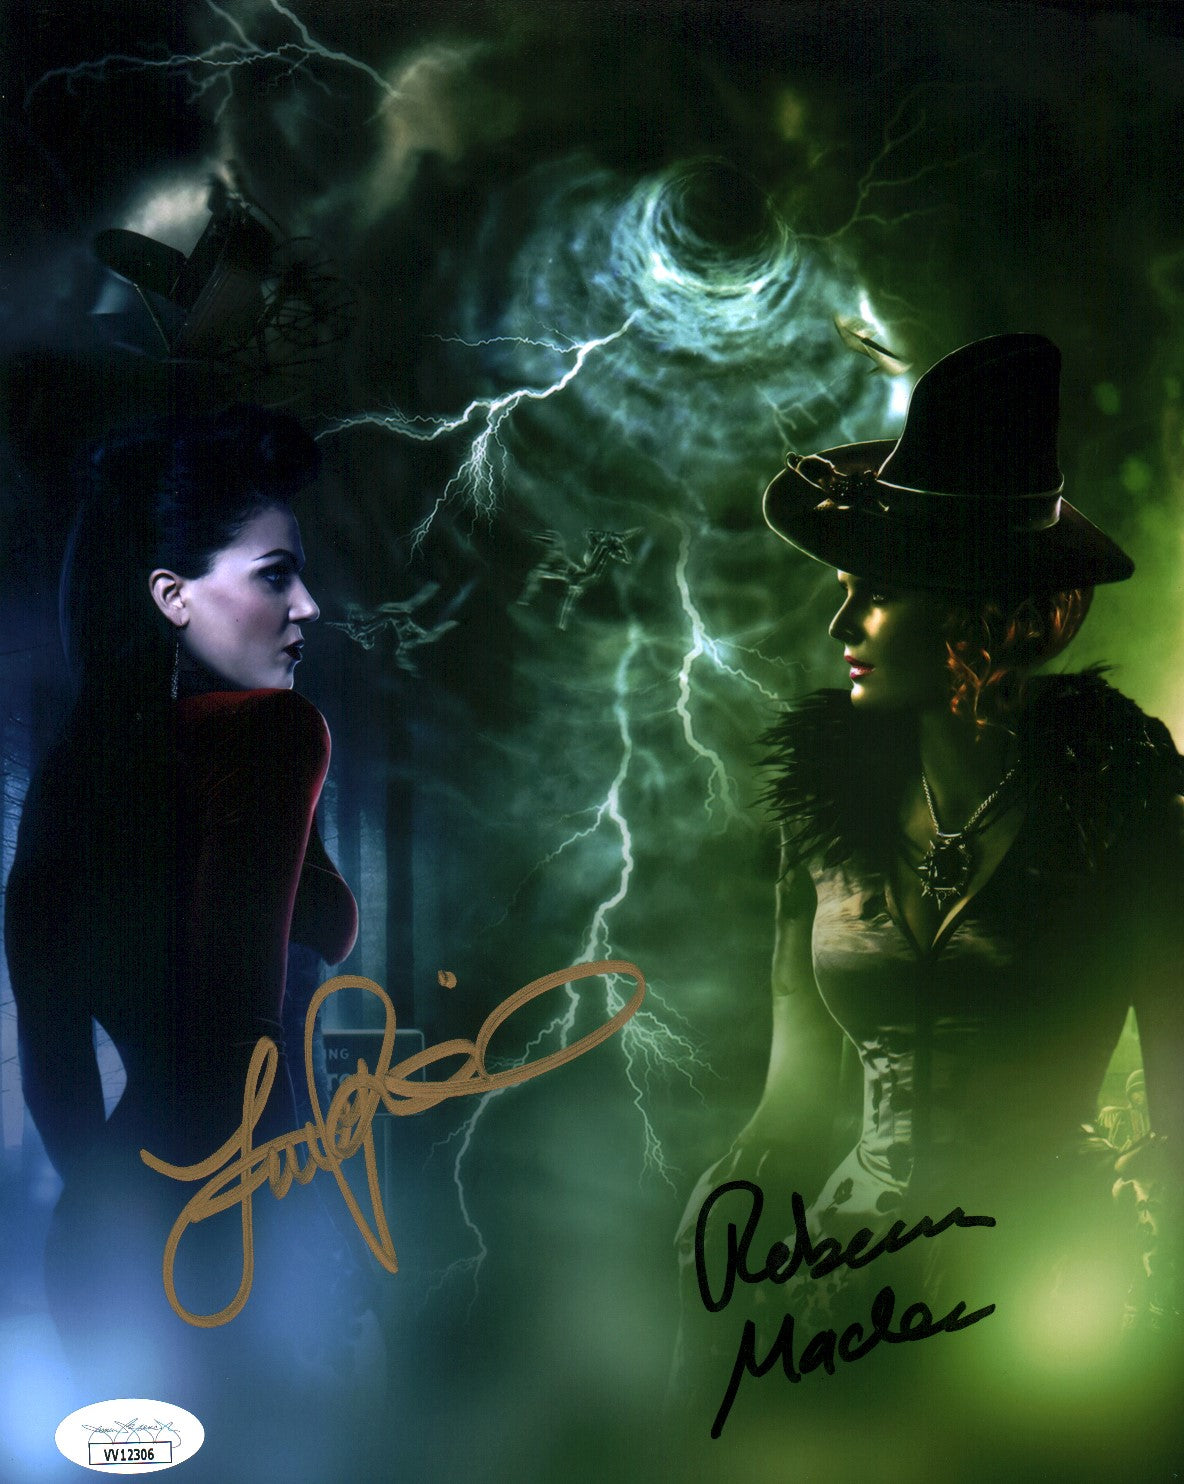 Once Upon A Time 8x10 Photo Parrilla Mader Signed Autograph JSA Certified COA